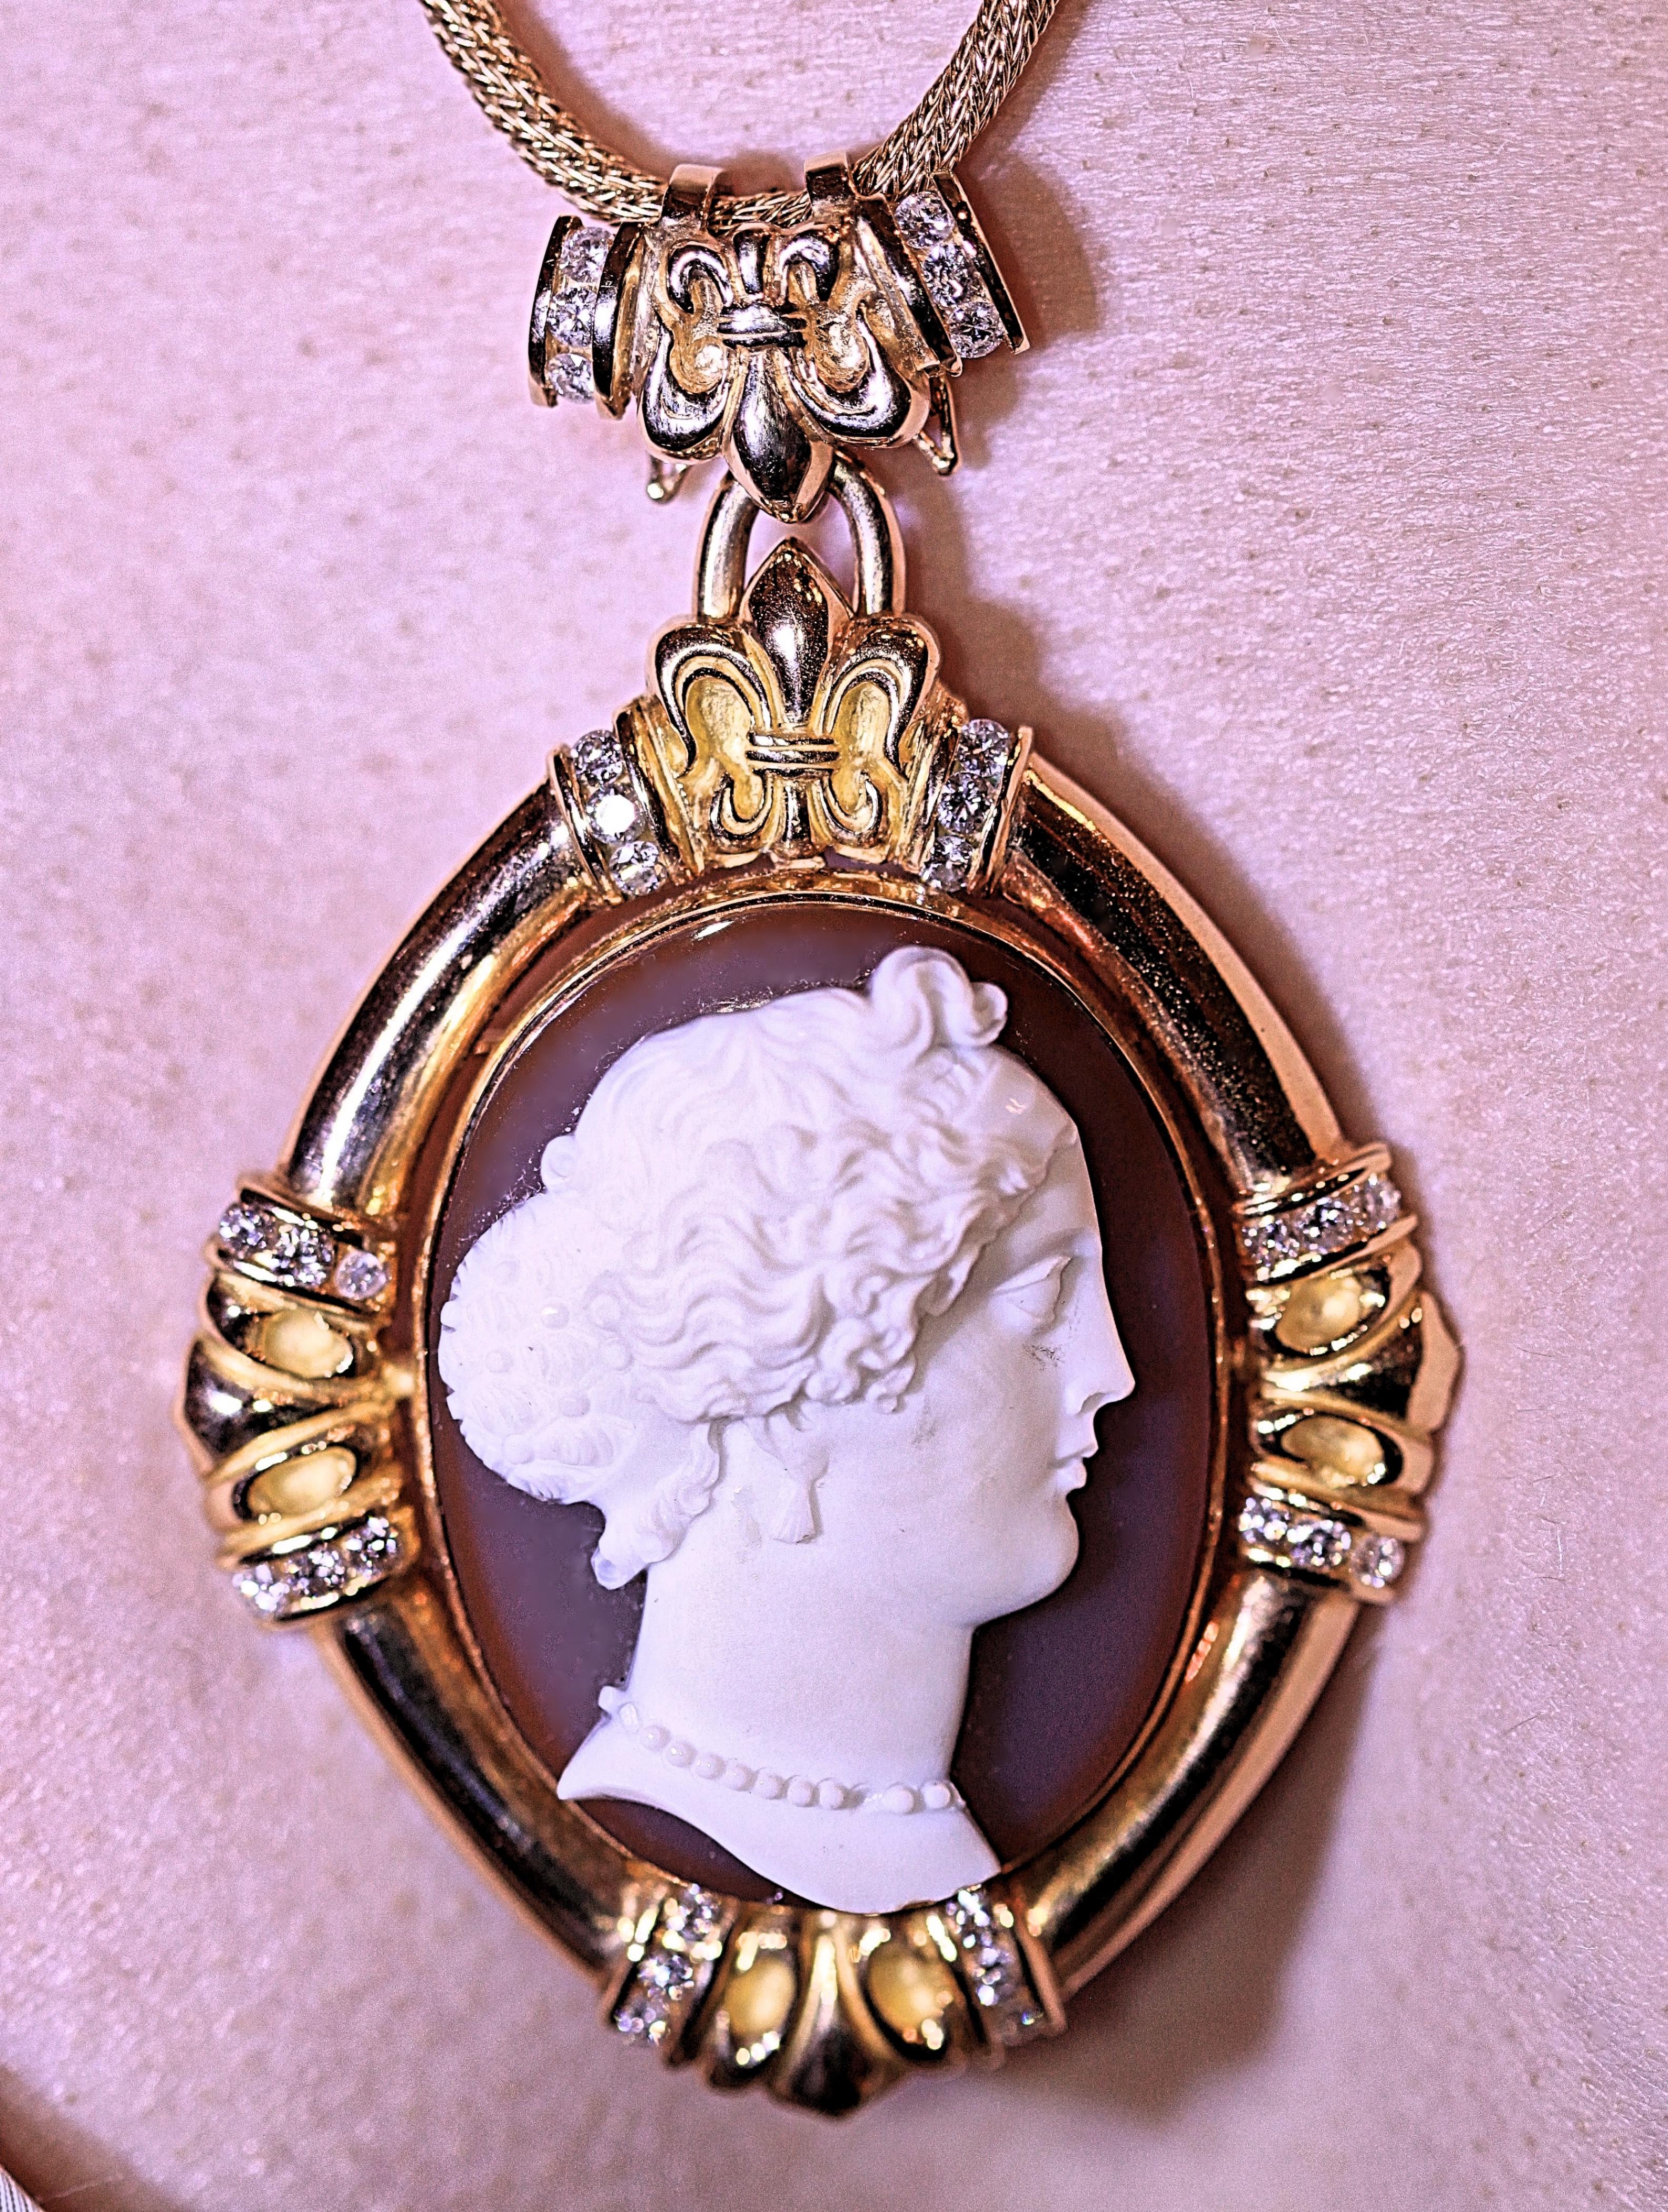 Antique French Agate Cameo Contemporary Diamond Mounting Brooch Necklace Pendant For Sale 7